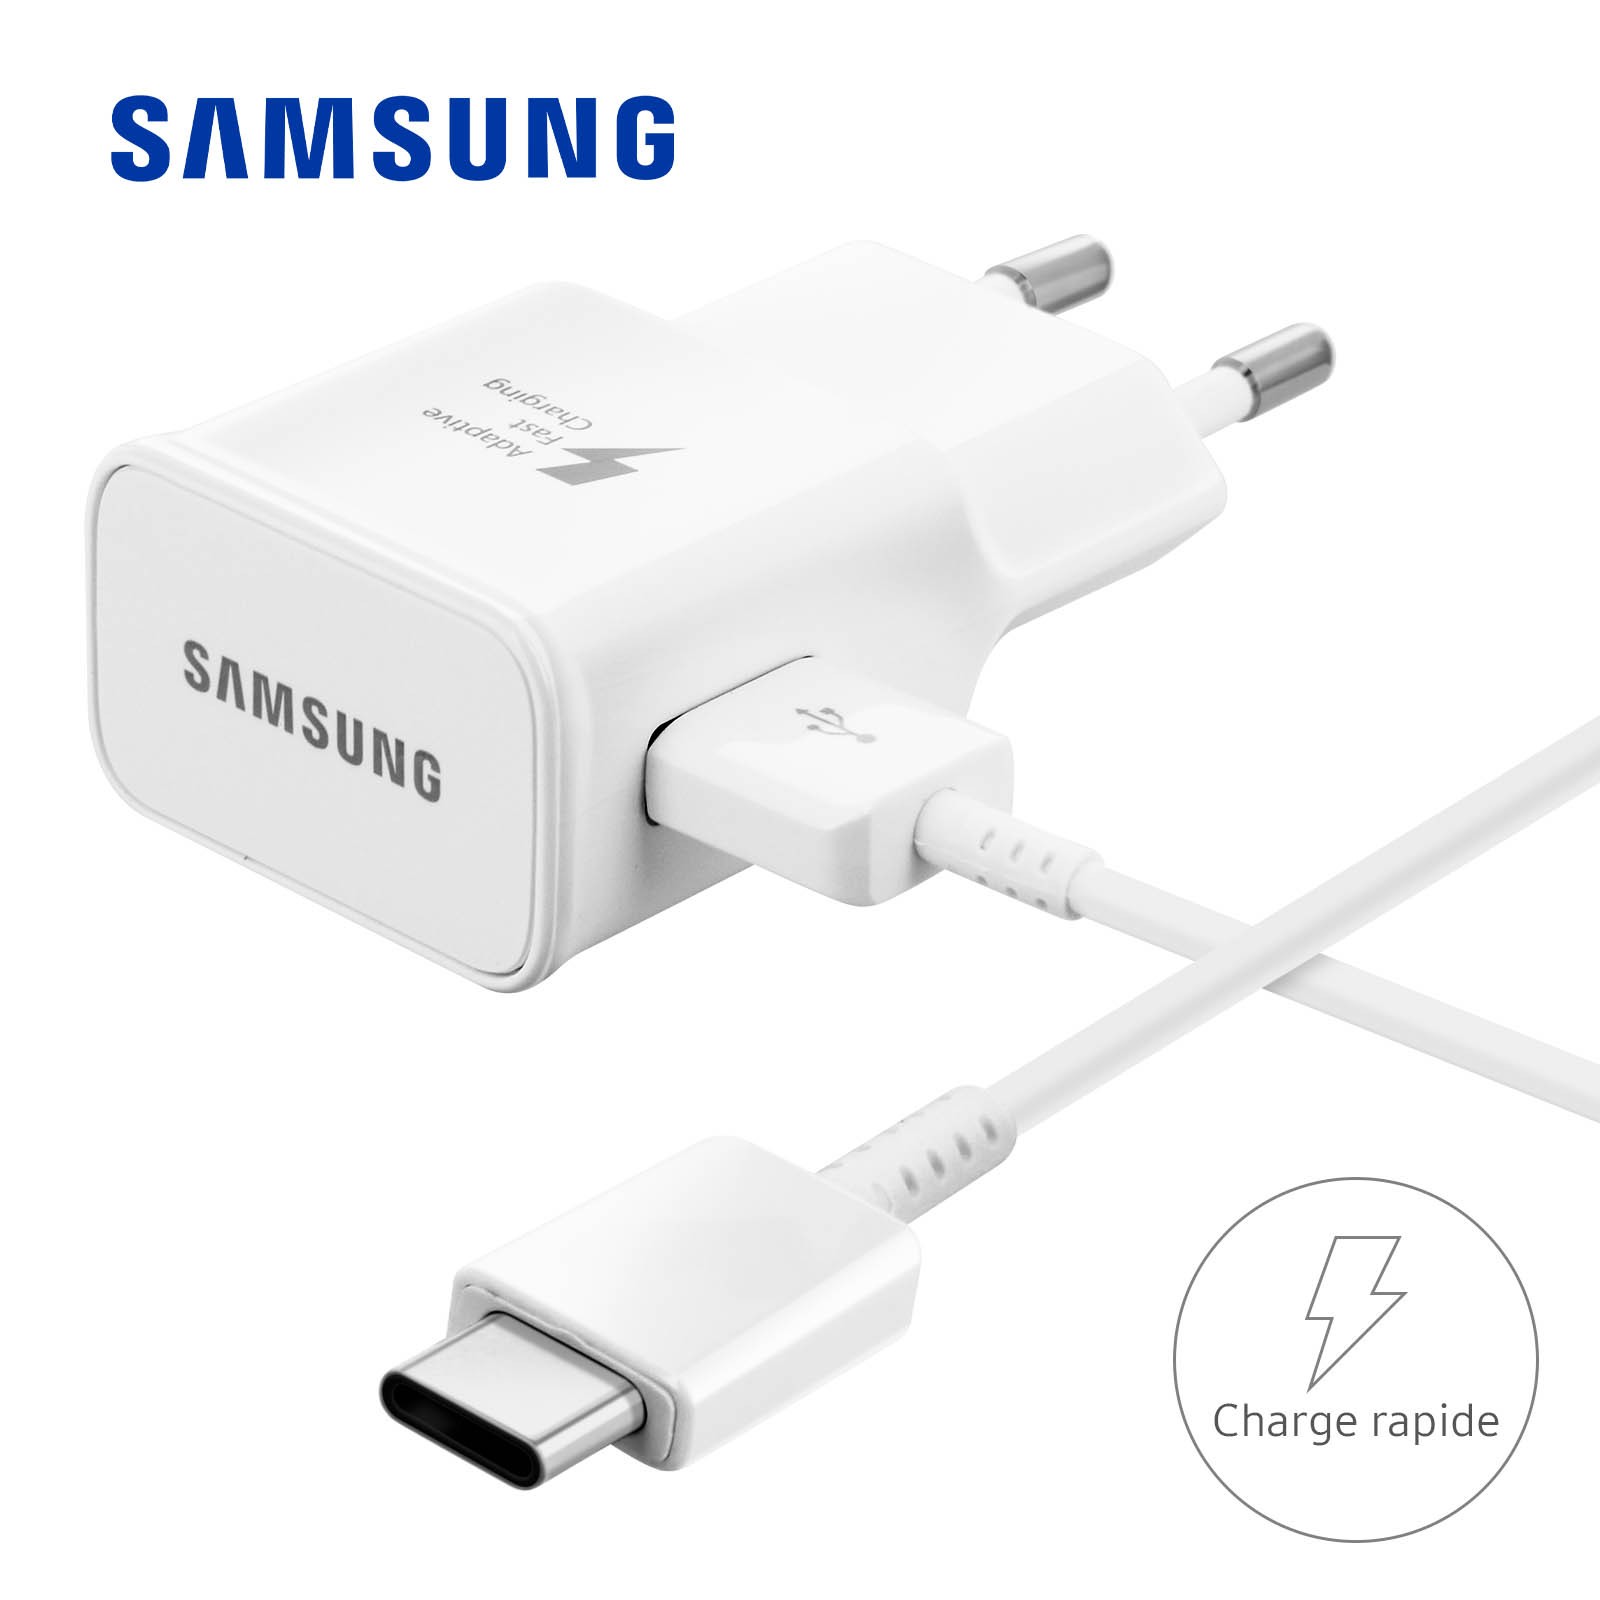 Samsung charger and cable C-type - SokoMall - Online Shopping for  Grocery,Electonics,Smartphones,Computers,Decor&Jewelry,  Healthy&Beauty,Drinks